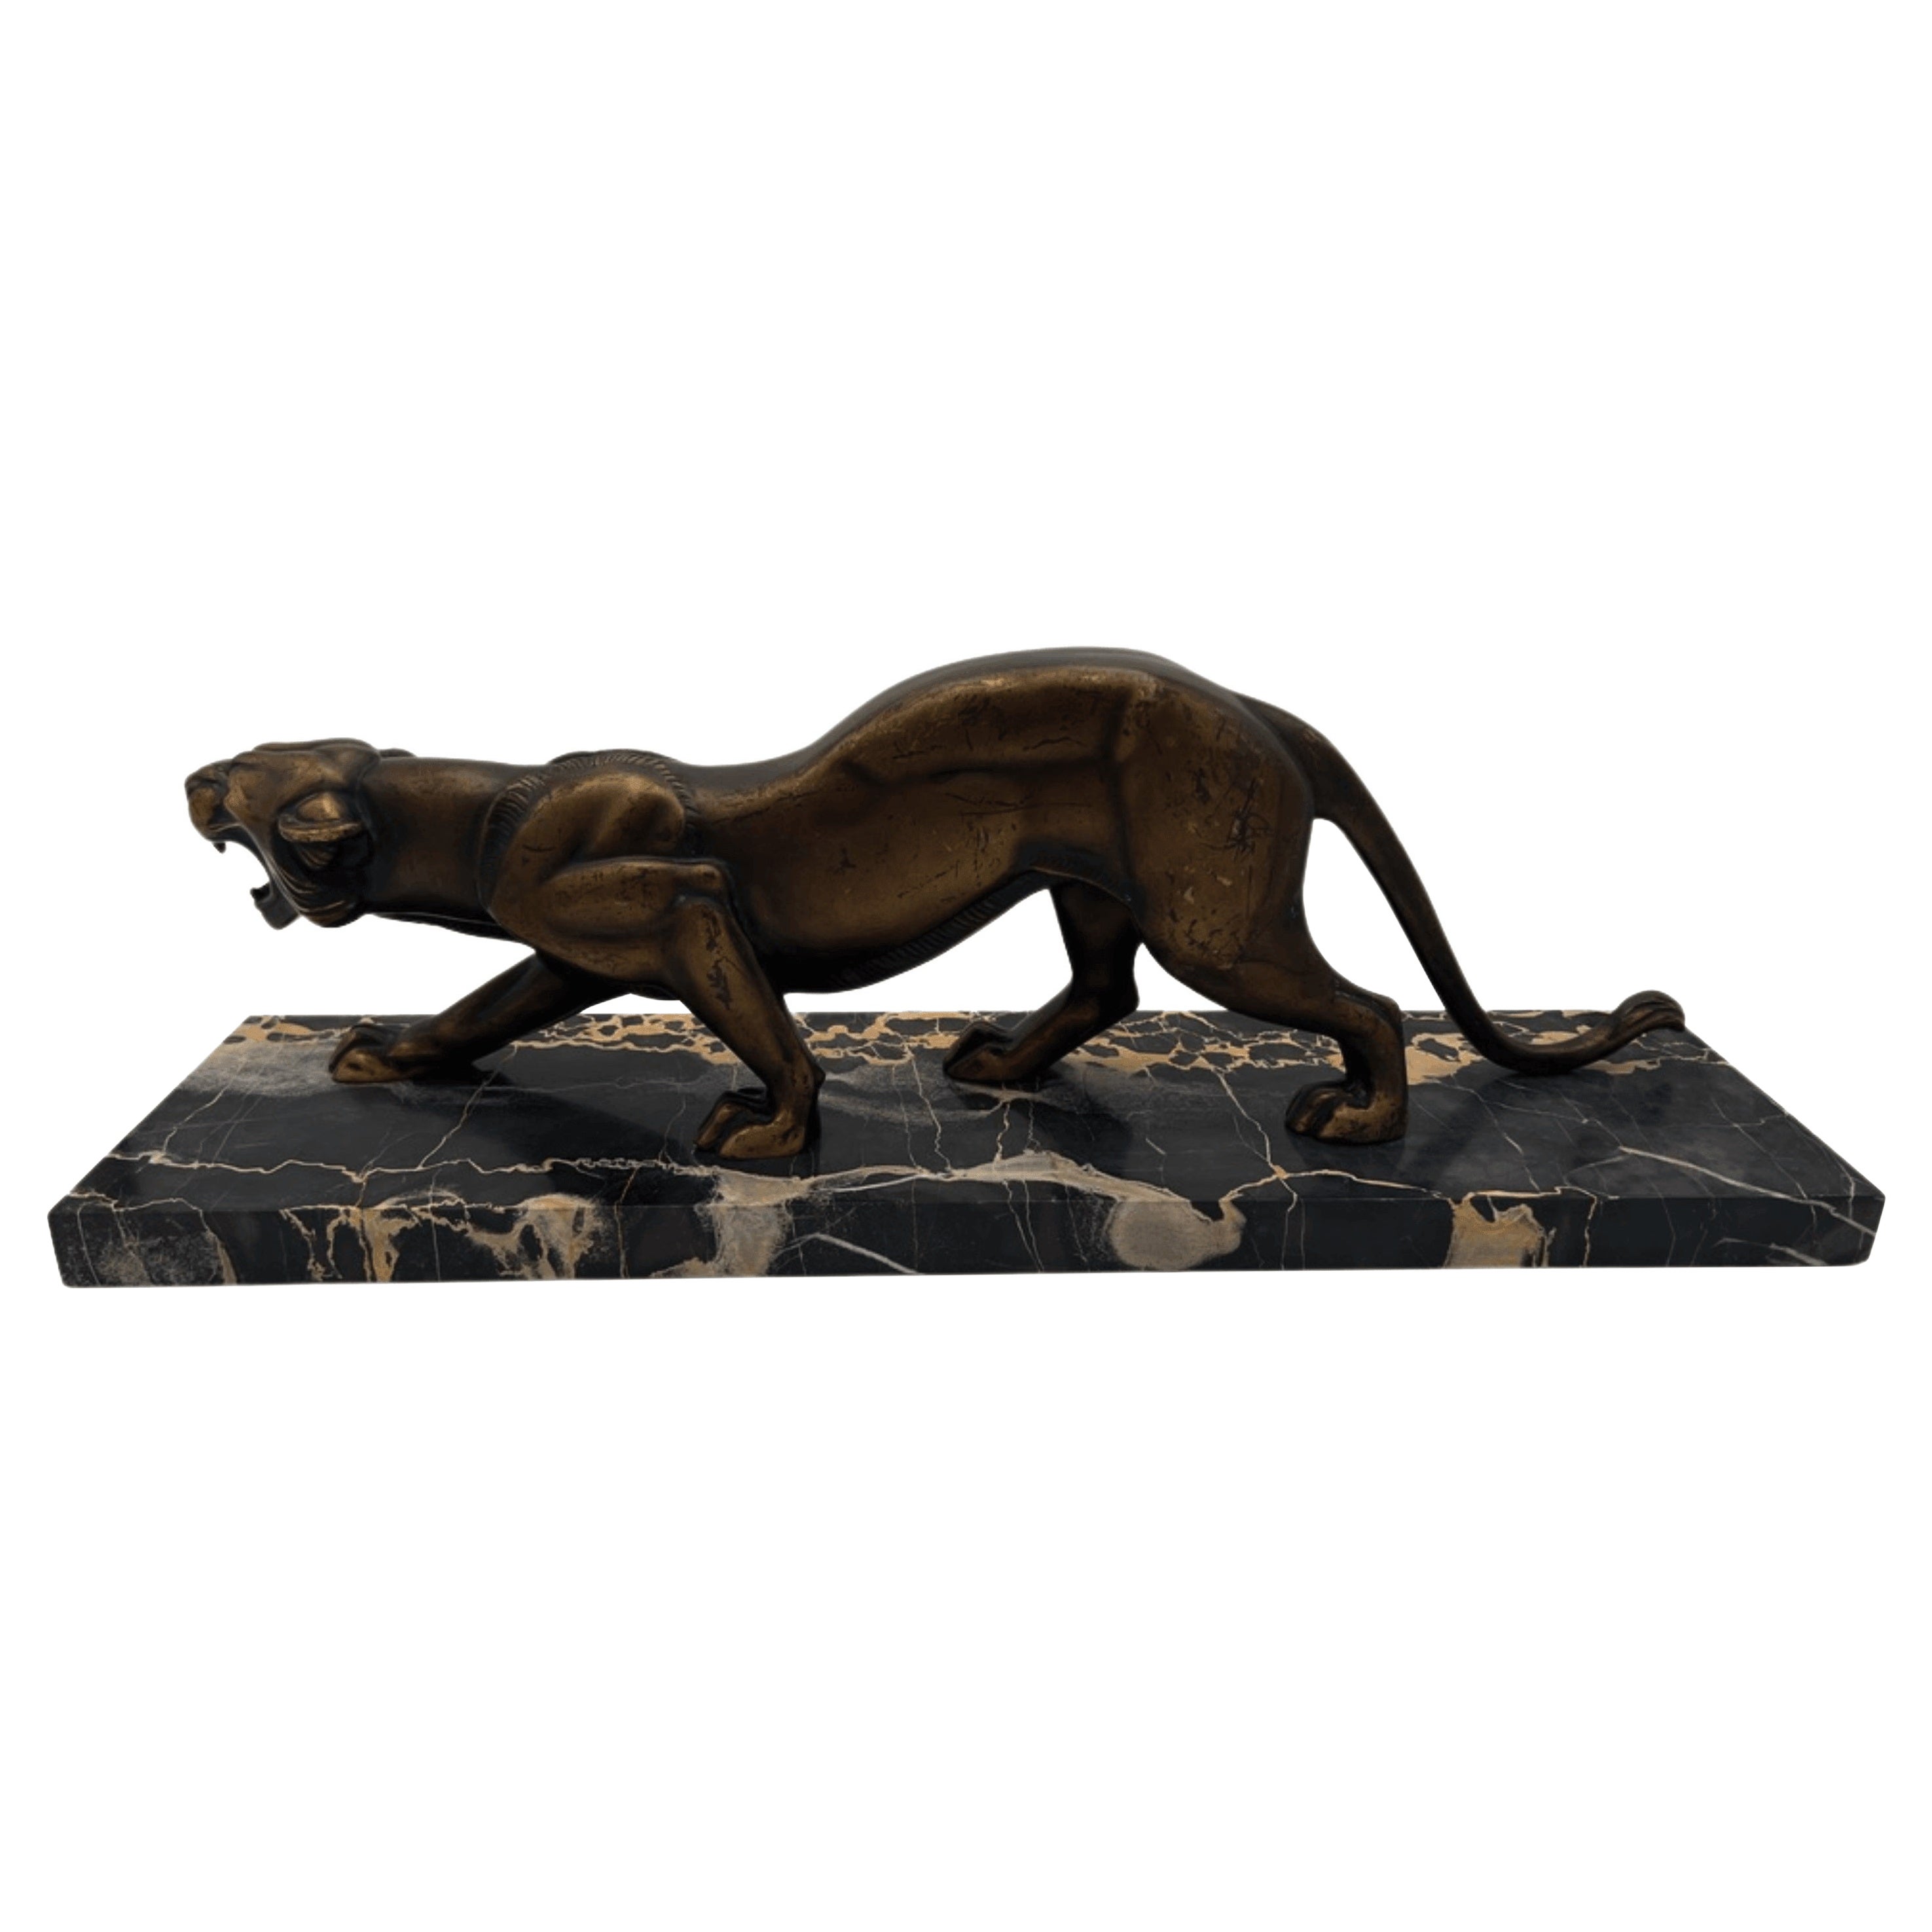 Art DecosSculpture of a panther, bronze cast, marble, France circa 1930

Elegant Art Deco Sculpture of a Panther

- Model by Irenee Rochard, unsigned
- Massive bronze cast, patinated, stamped
- Portor marble plinth, added later and therefore